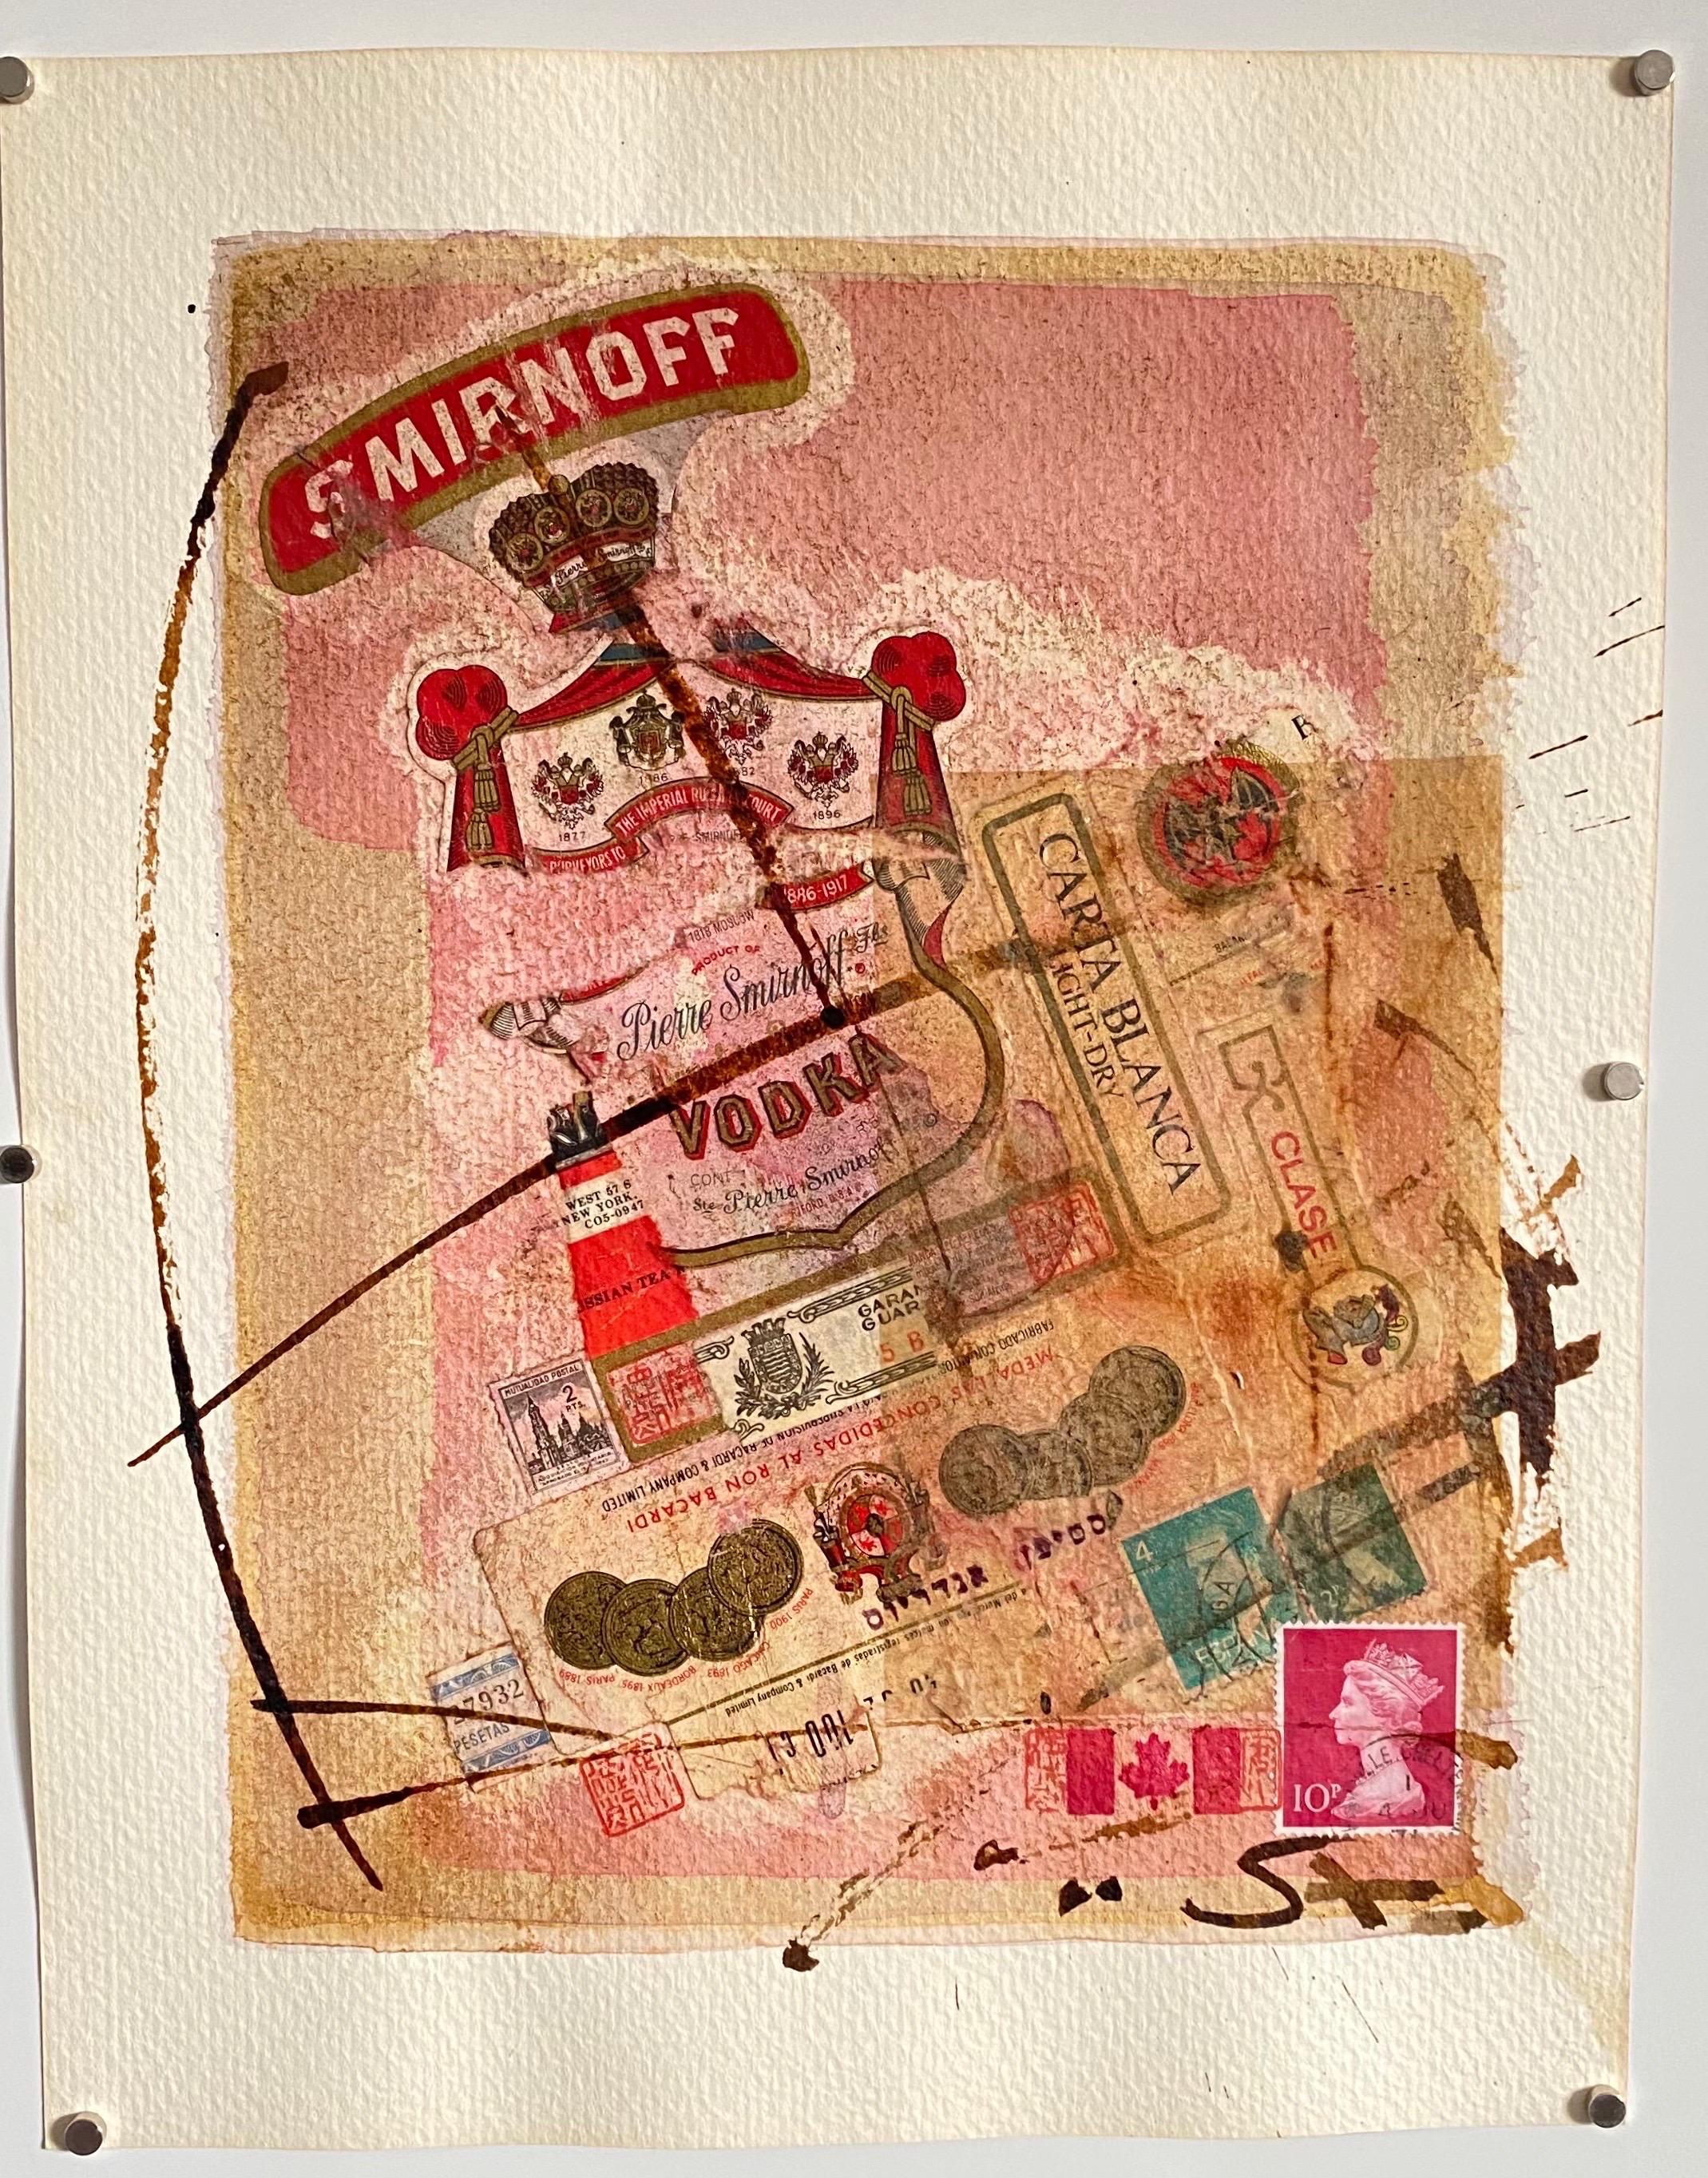 Canadian Art MIxed Media Collage Assemblage Painting Hebrew Stamp Smirnoff Vodka 2